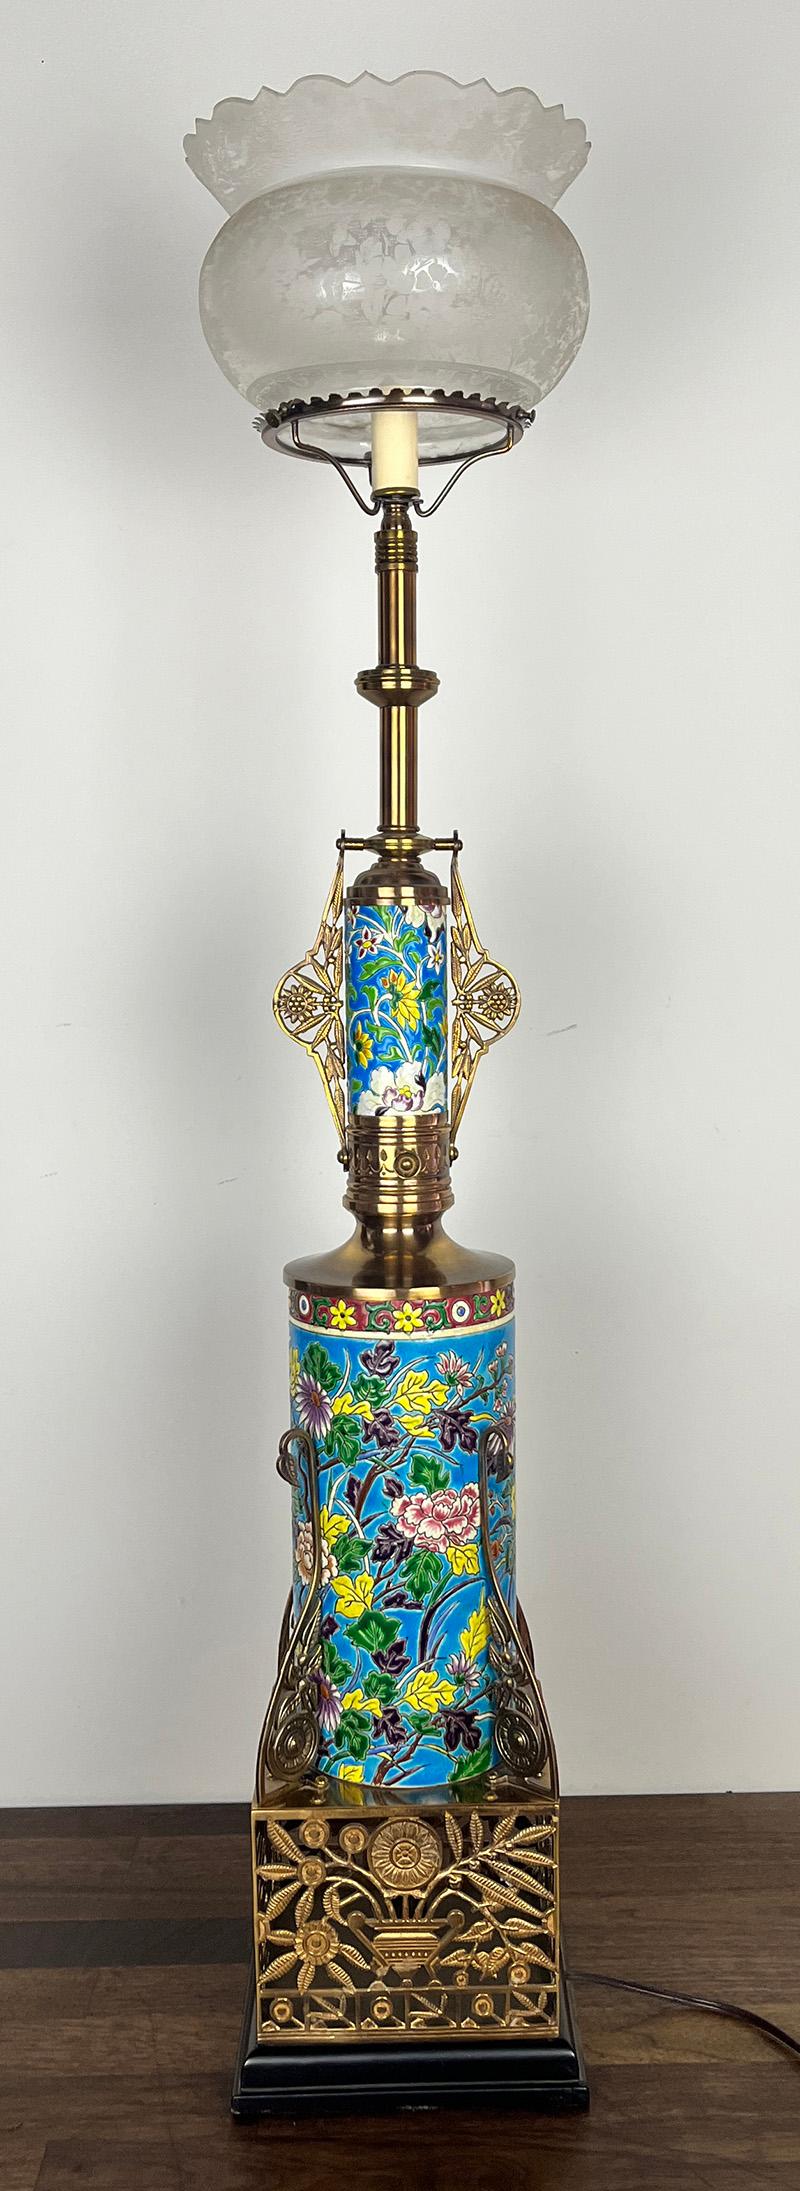 Stunning original 1880s converted gas newel post. This is the largest we have ever had in over 40 years as an antique lighting dealer. Original porcelain inserts are attributed to Longwy base on the pattern and cloisonne technique. Colours are